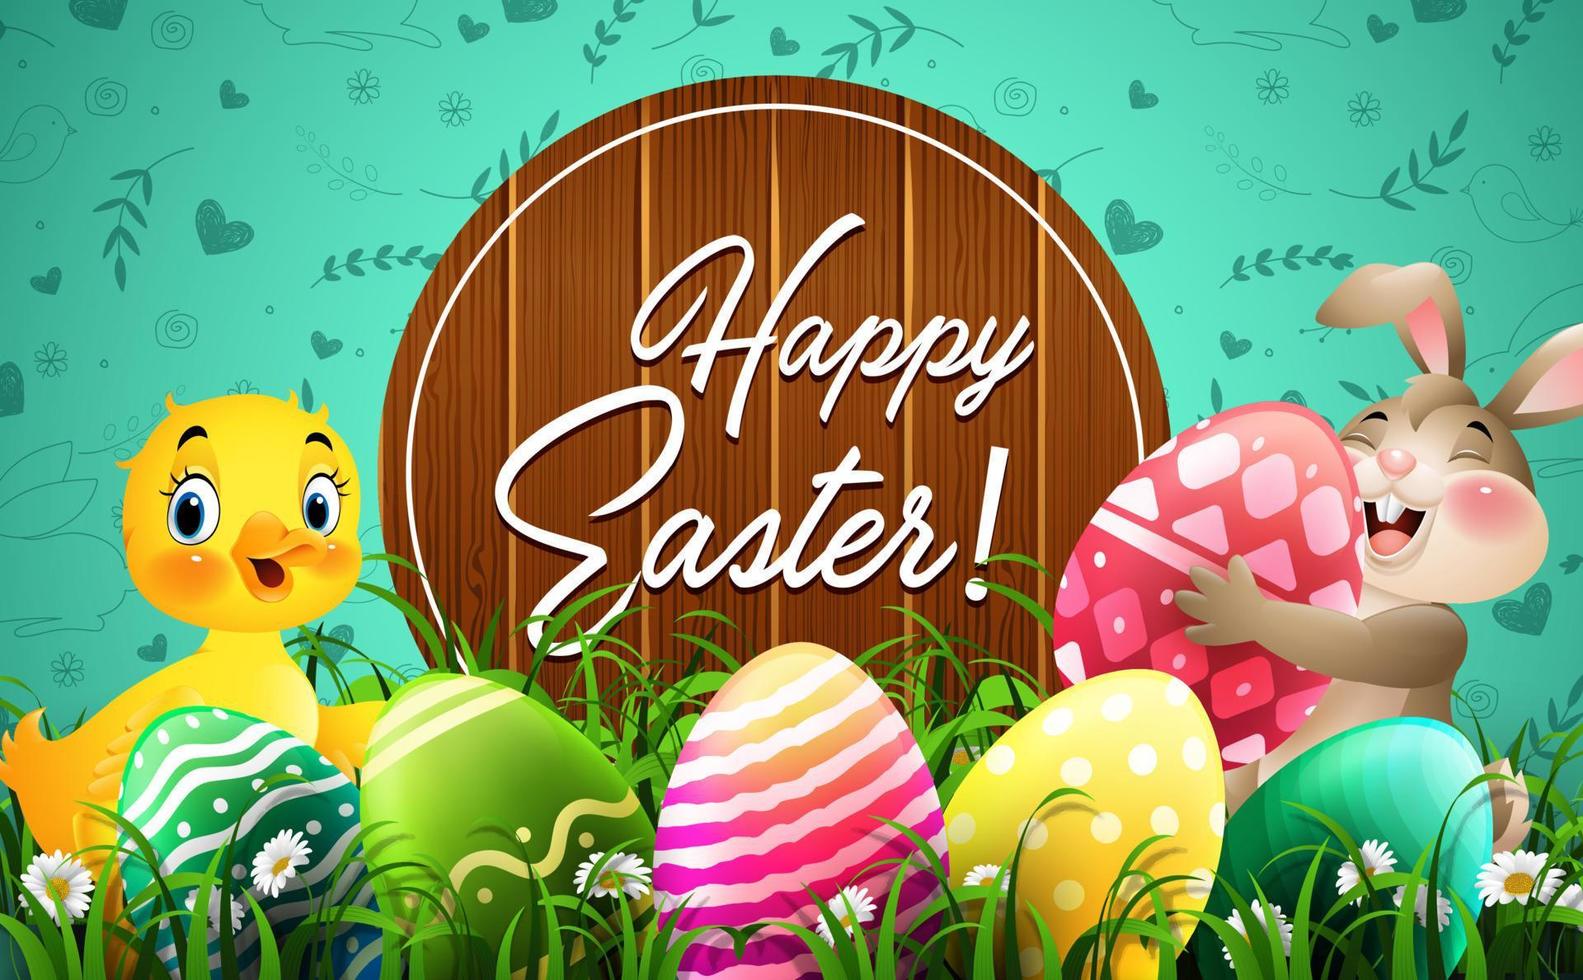 Easter greeting card with little rabbit, duckling, colorful eggs and a wooden sign vector